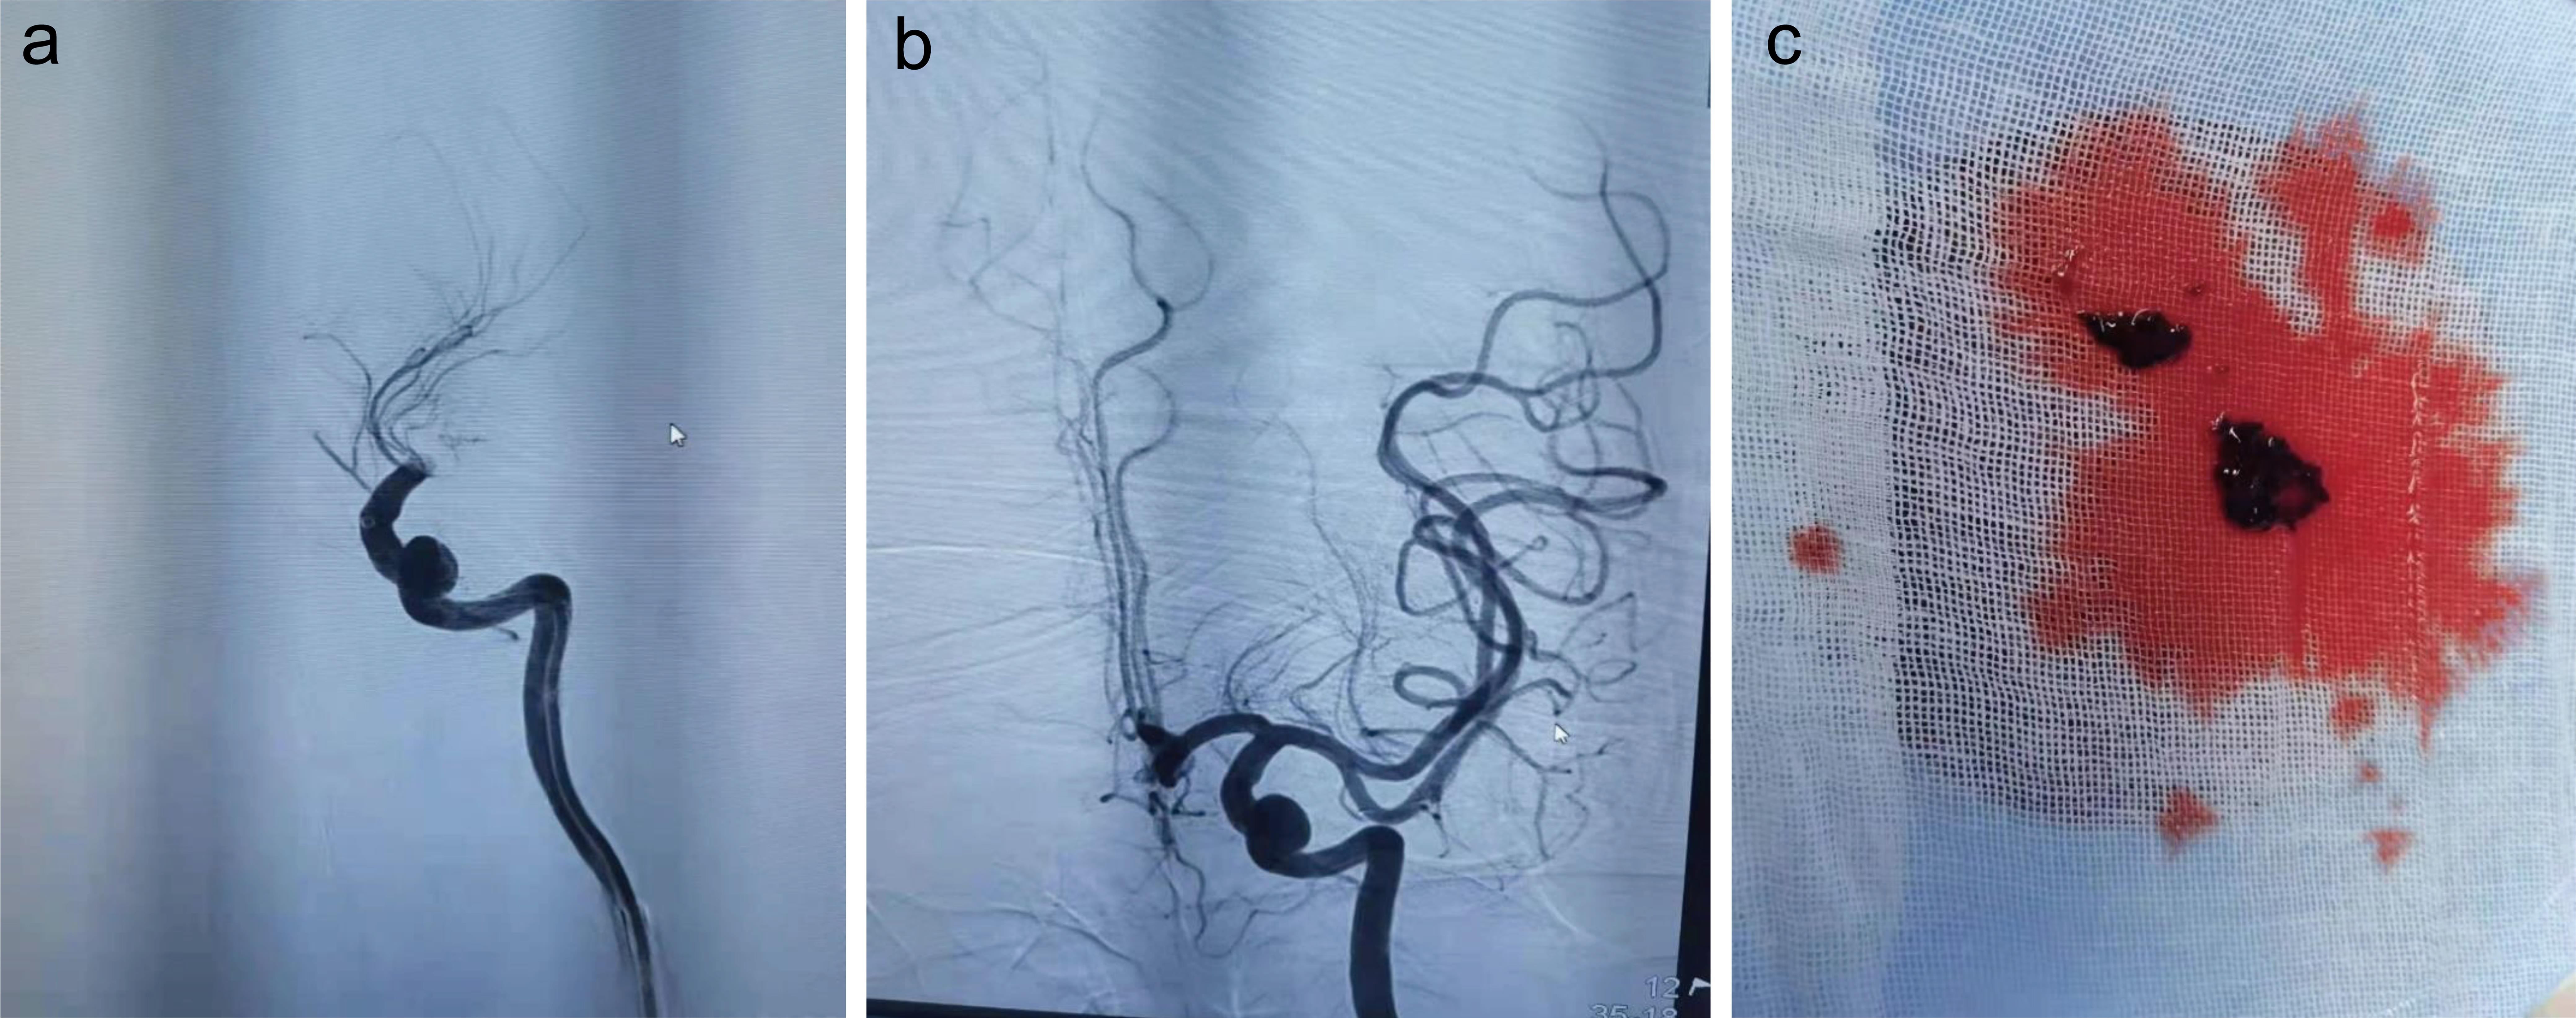 Emergency cerebral angiography and stent retriever thrombectomy at the end of the left internal carotid artery.